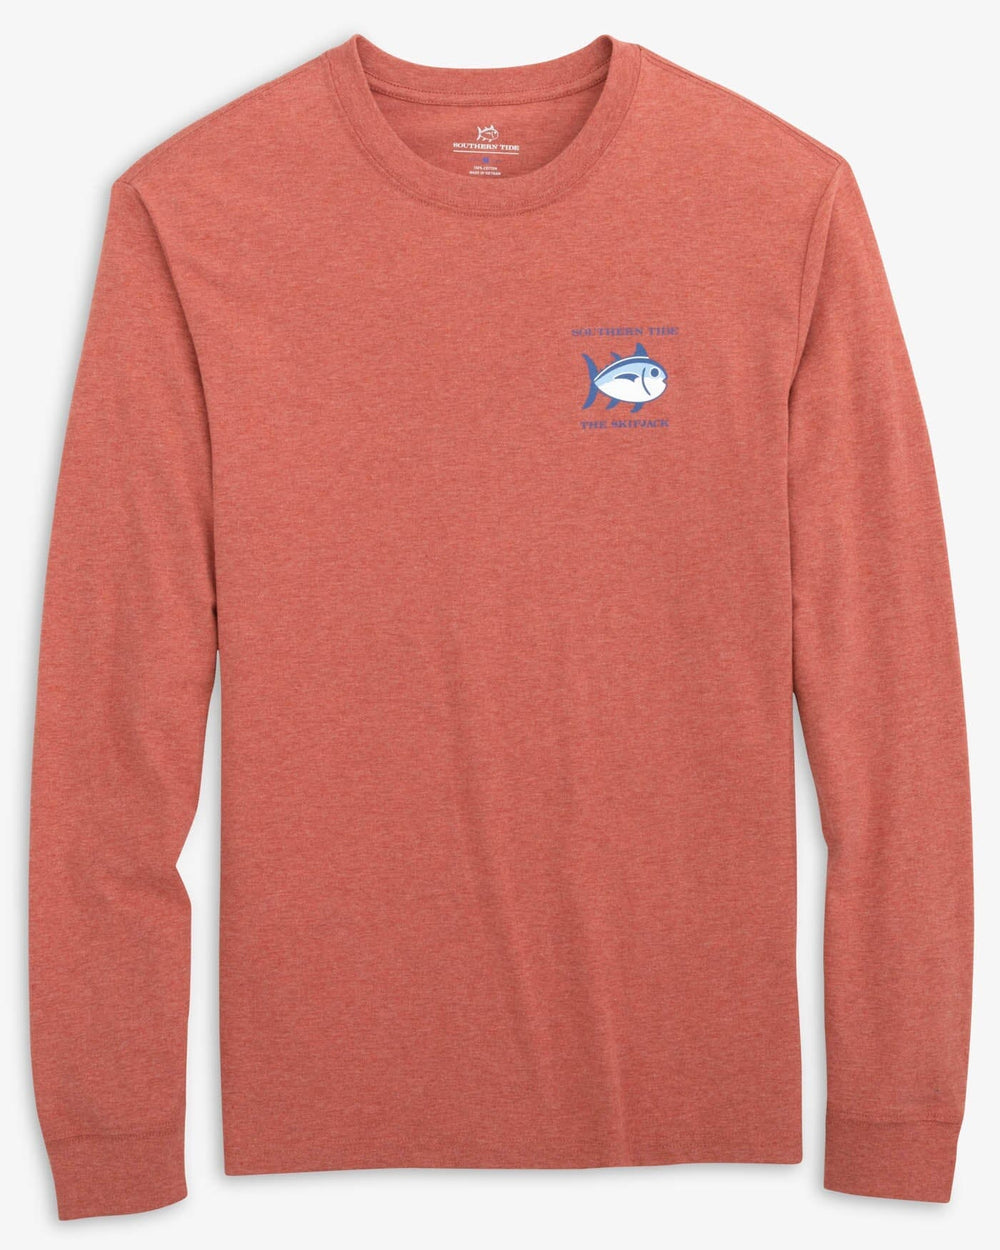 The front view of the Southern Tide Heather Original Skipjack Long Sleeve T-shirt by Southern Tide - Heather Dusty Coral